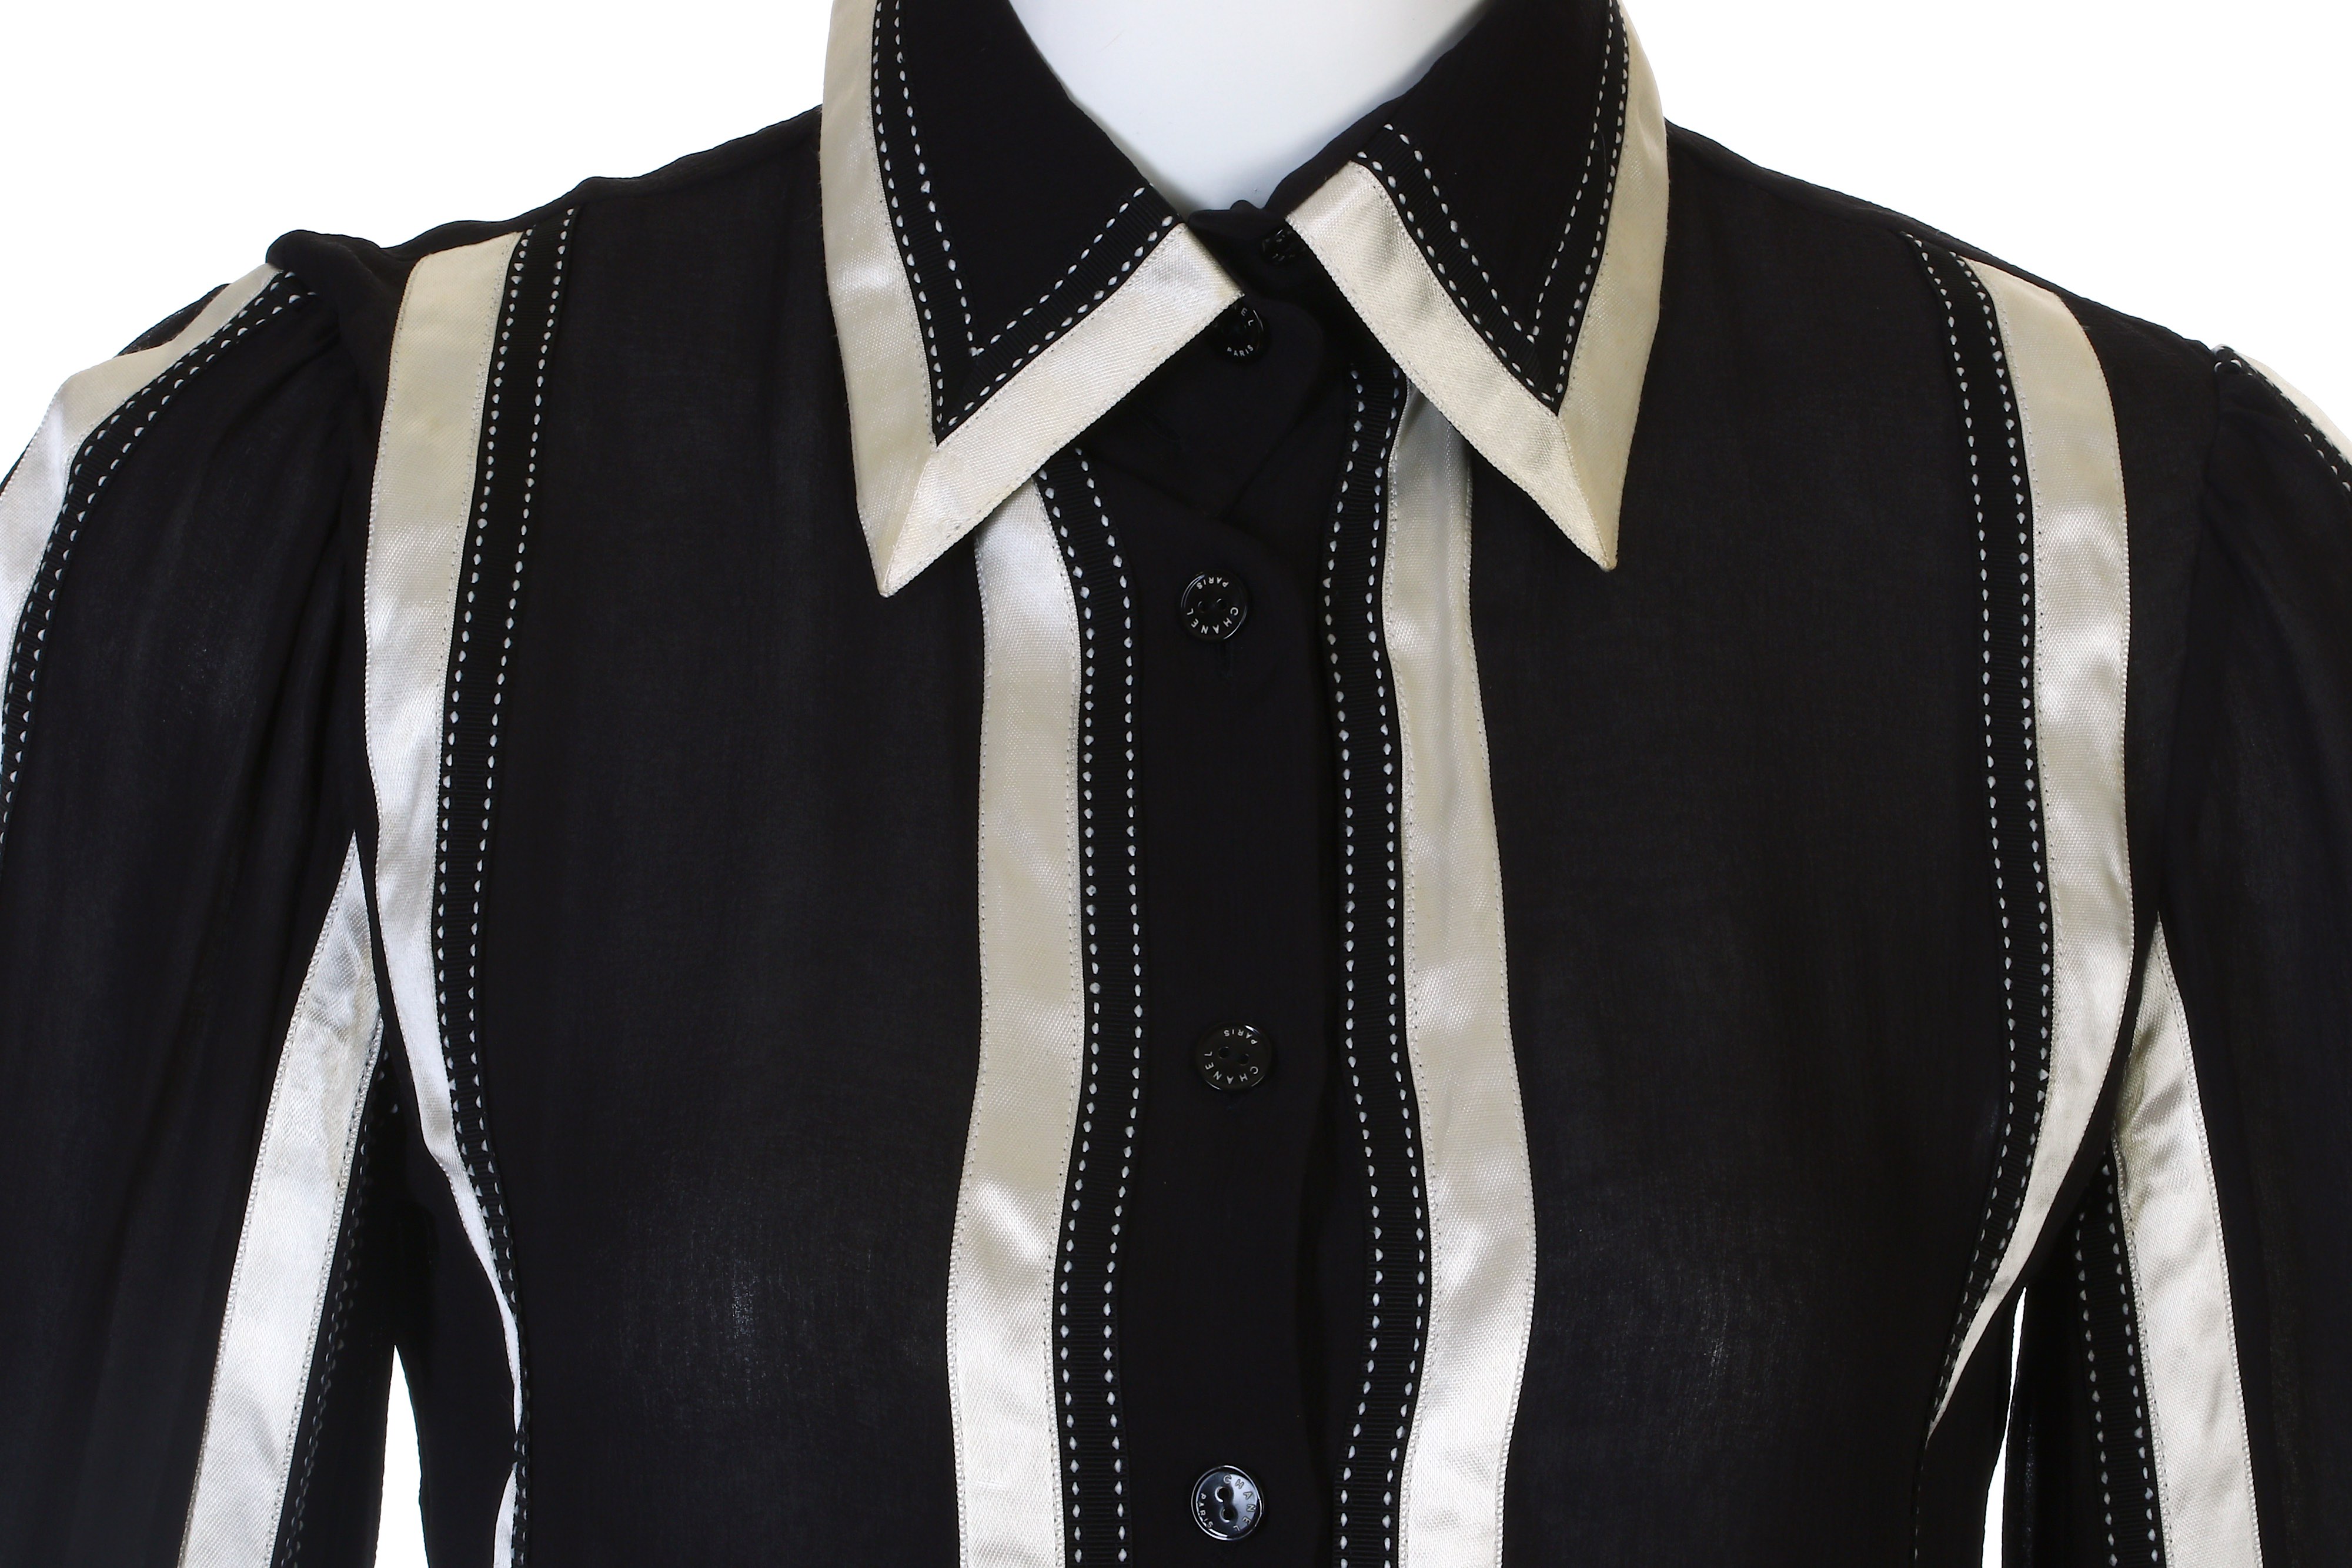 Two Pieces of Chanel Silk Shirts - Image 2 of 11